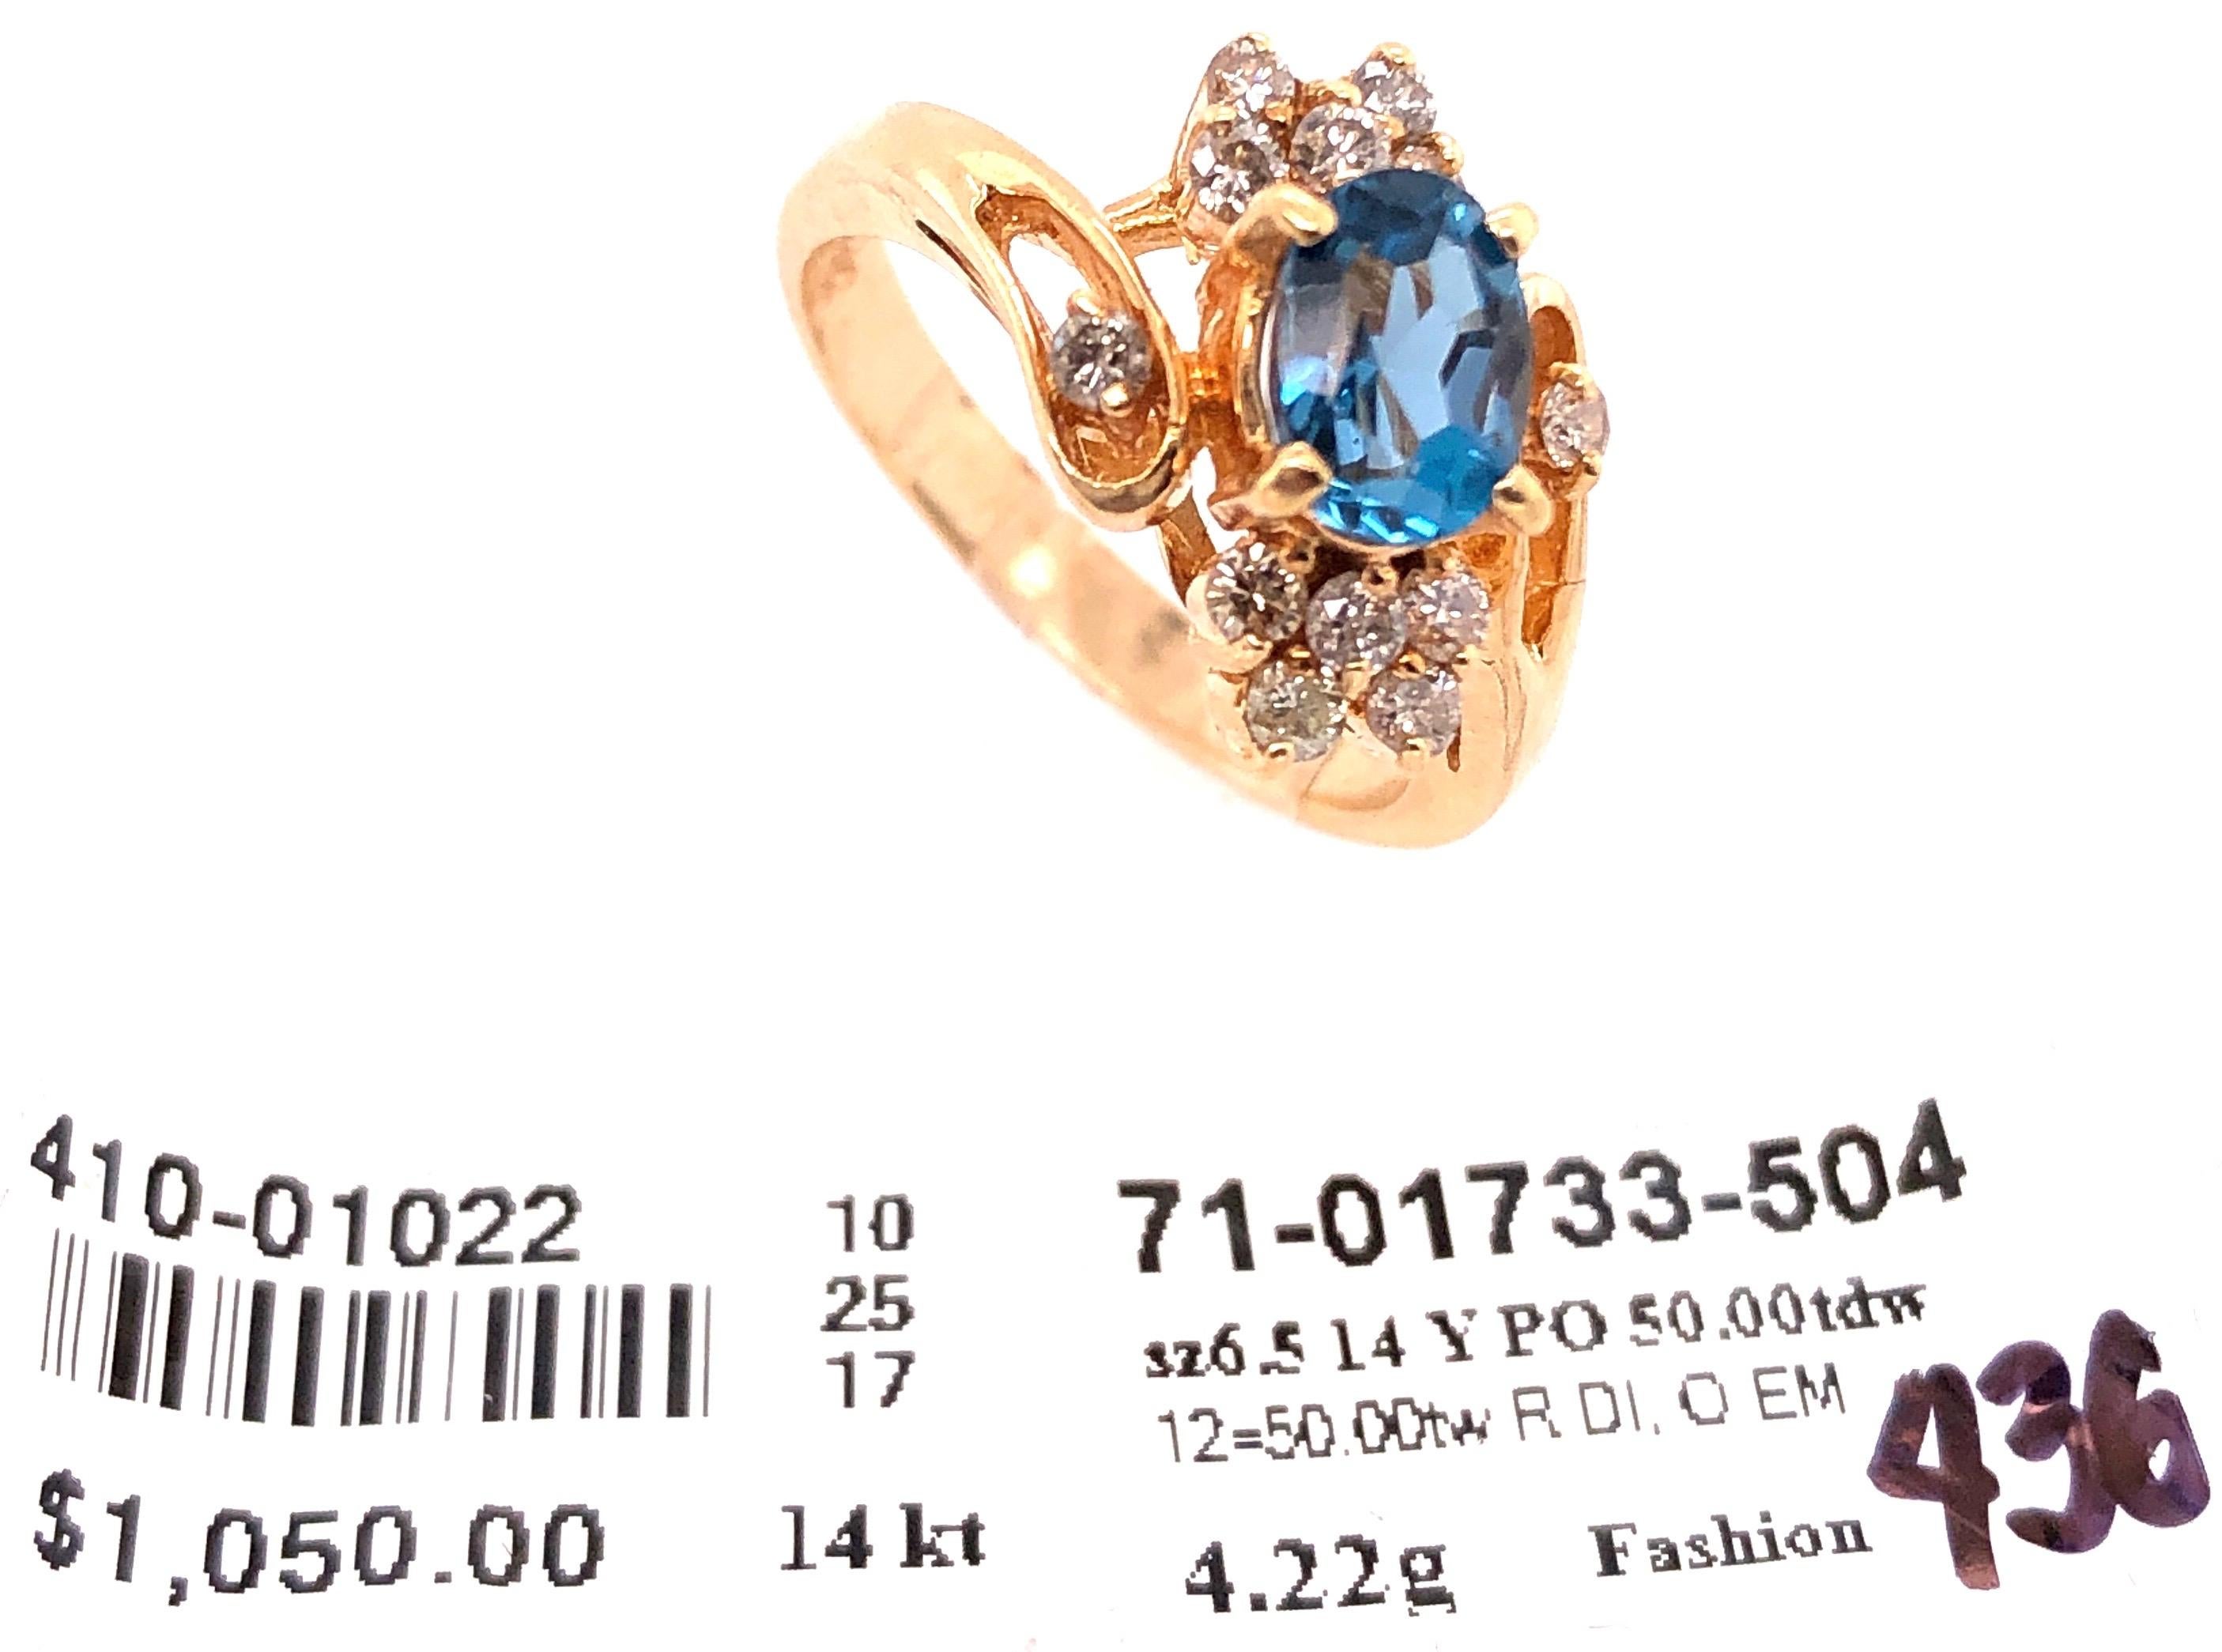 14 Karat Yellow Gold Blue Emerald Ring with Diamond Accents 50.00 TDW For Sale 6